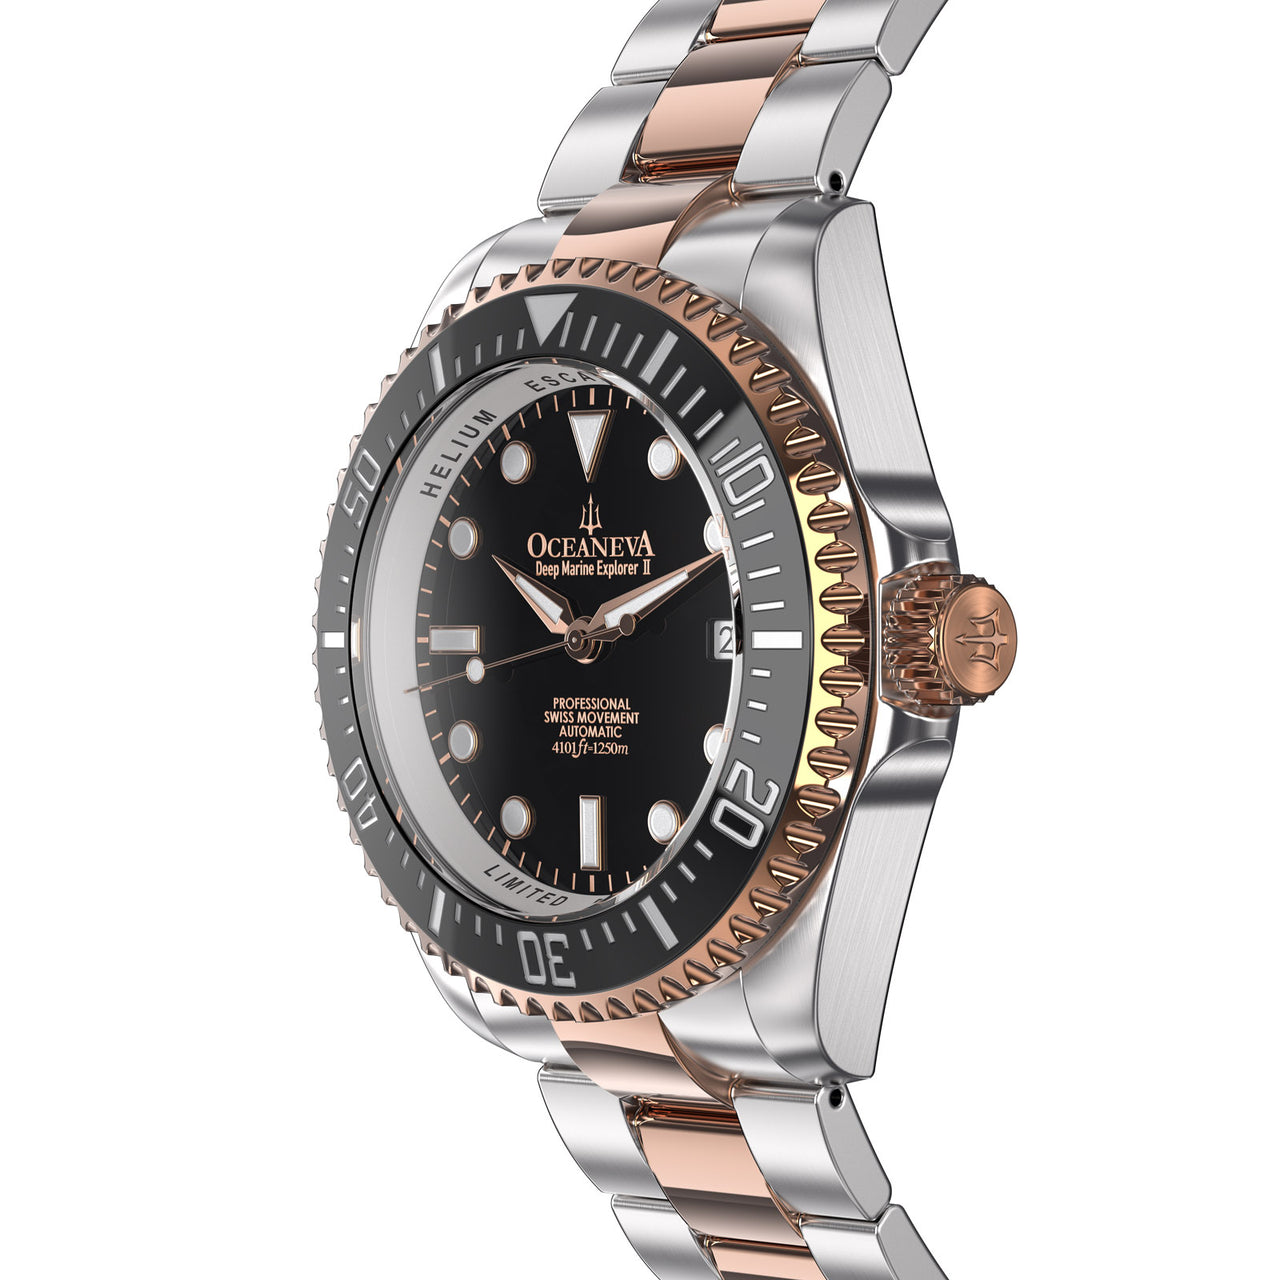 Oceaneva 1250M Dive Watch Black And Rose Gold Side View Crown